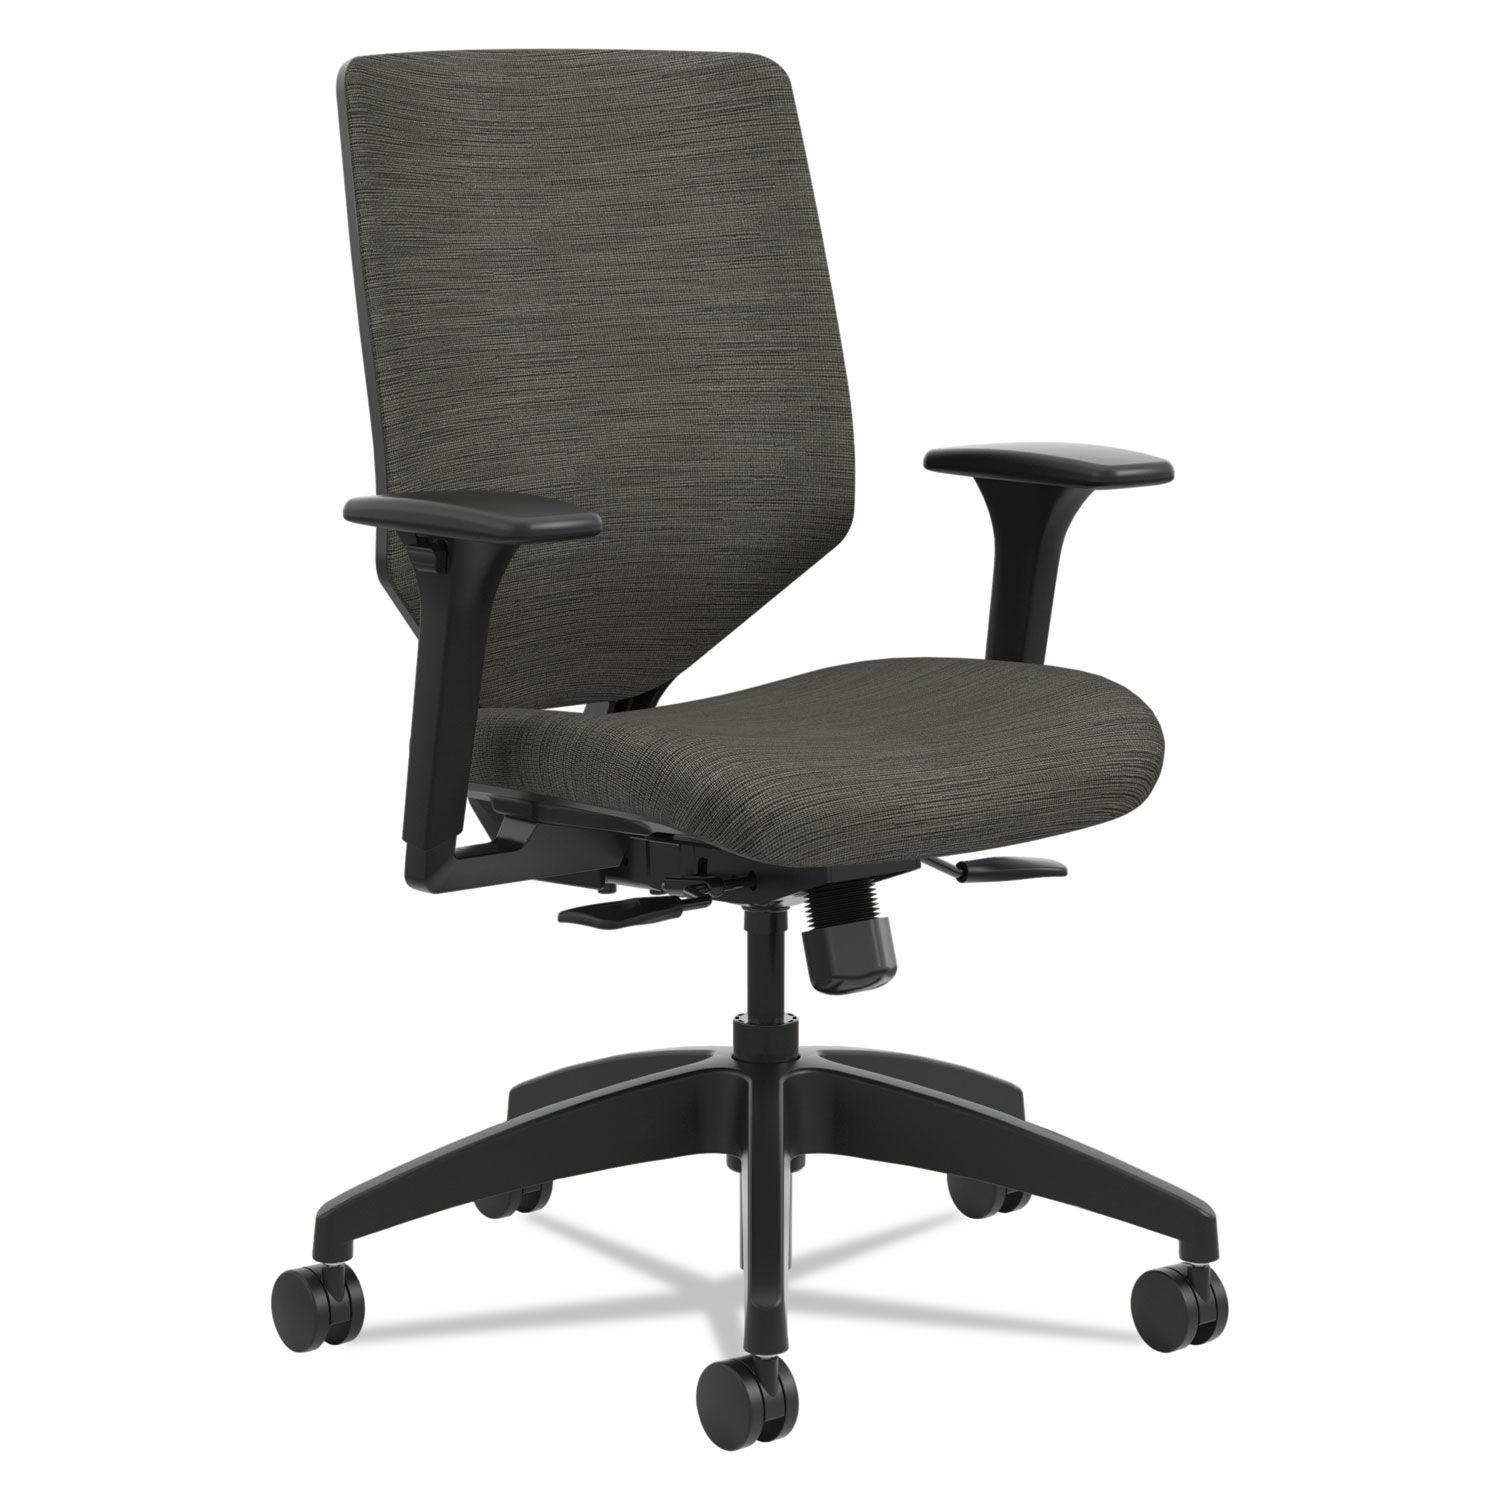 Solve Series Upholstered Back Task Chair Supports Up to 300 lb, 17" to 22" Seat Height, Ink Seat/Back, Black Base